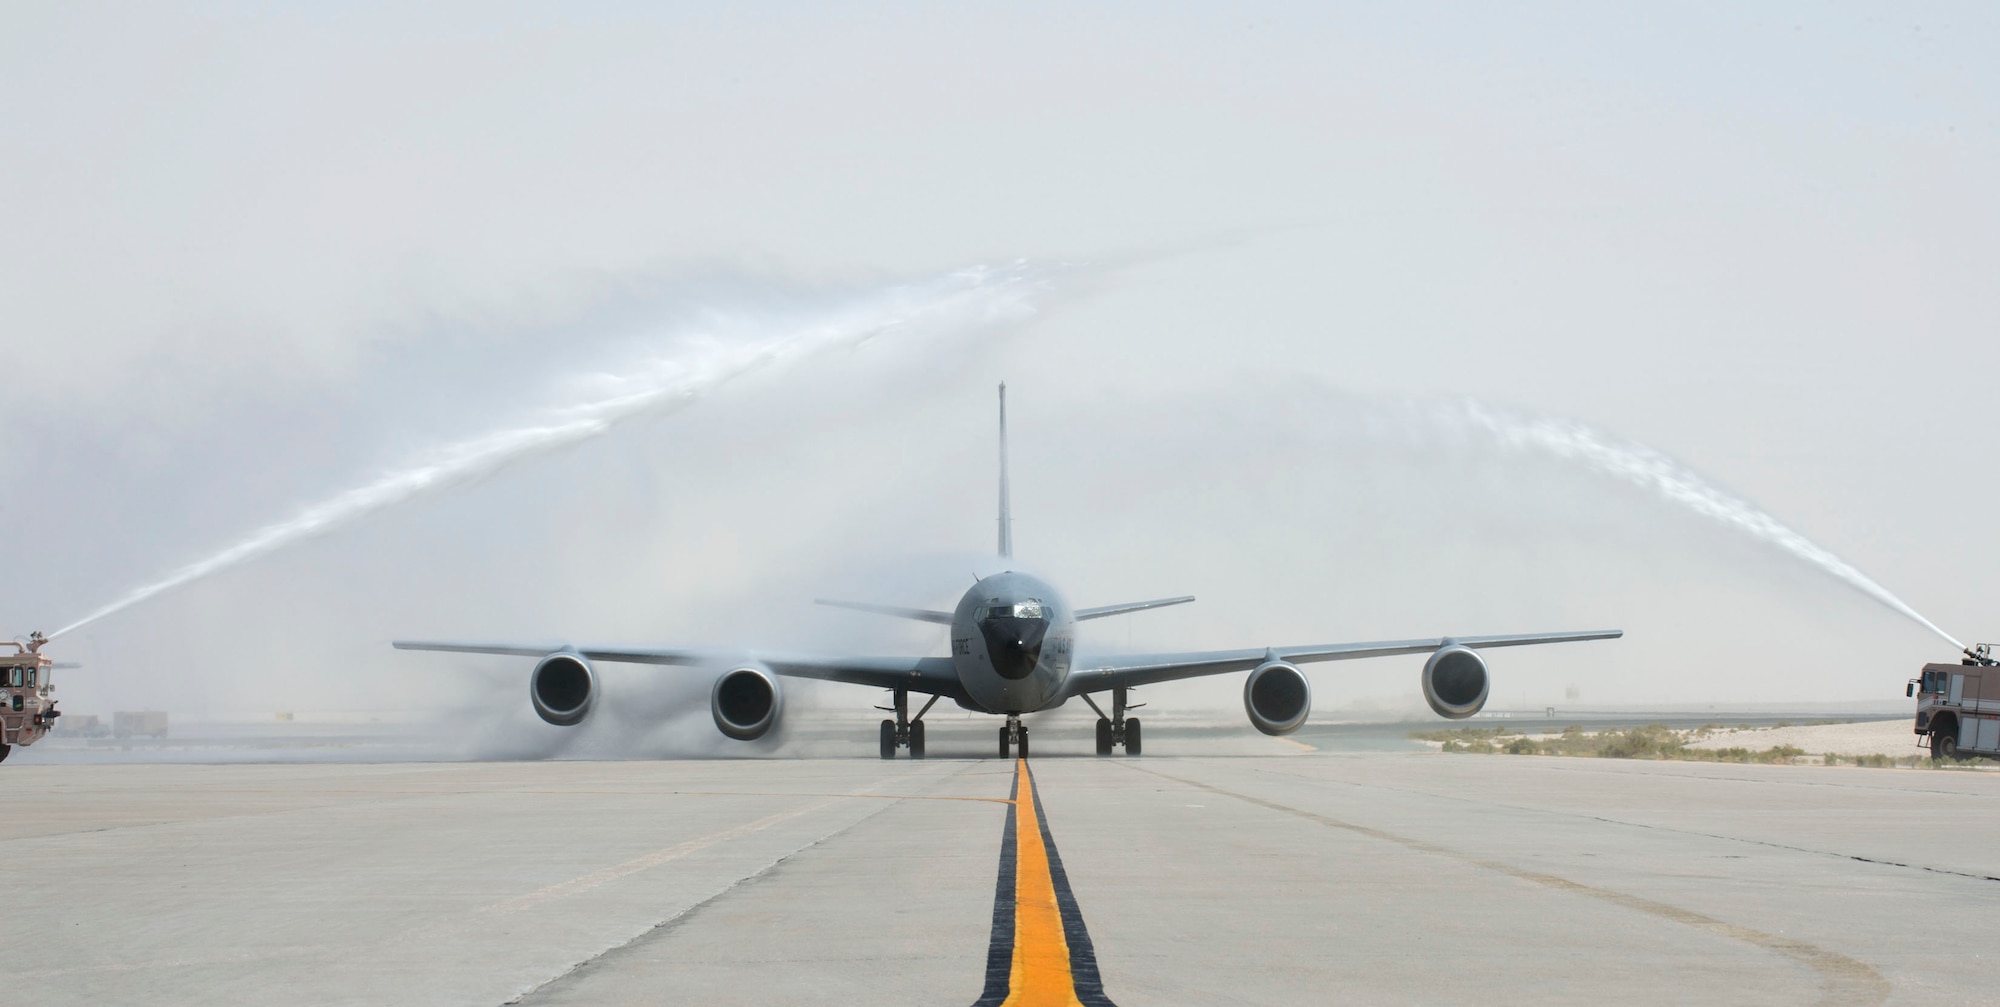 Fire engines with the 379th Expeditionary Civil Engineer Squadron Fire Department give U.S. Air Force Brig. Gen. Darren James, wing commander of the 379th Air Expeditionary Wing, a water salute after completing his fini-flight at Al Udeid Air Base, Qatar, May 29, 2017.  The fini-flight is a time honored aviation tradition which marks the end of James’s flying status as wing commander of the 379th AEW. During his time as Wing Commander, James flew over 325 hours and 40 sorties.  (U.S. Air Force photo by Tech. Sgt. Amy M. Lovgren)